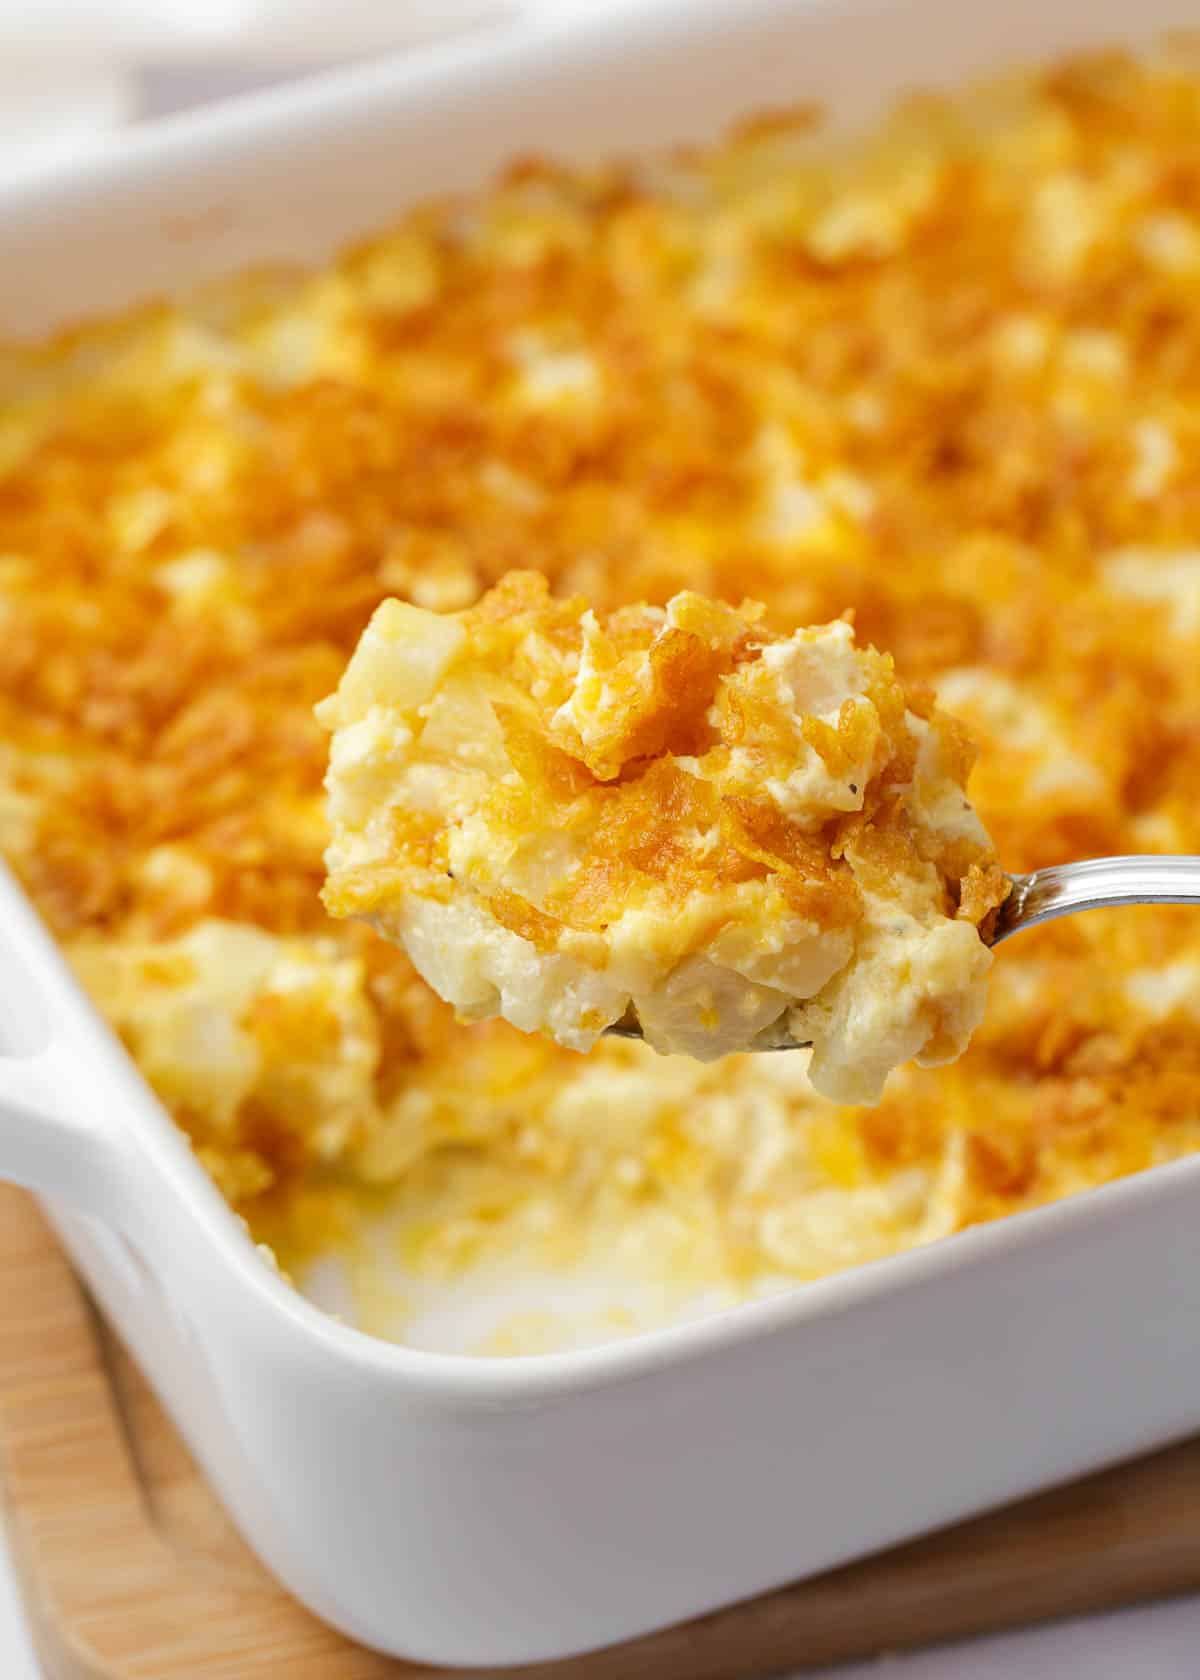 Spoonful of funeral potatoes in a white baking dish.